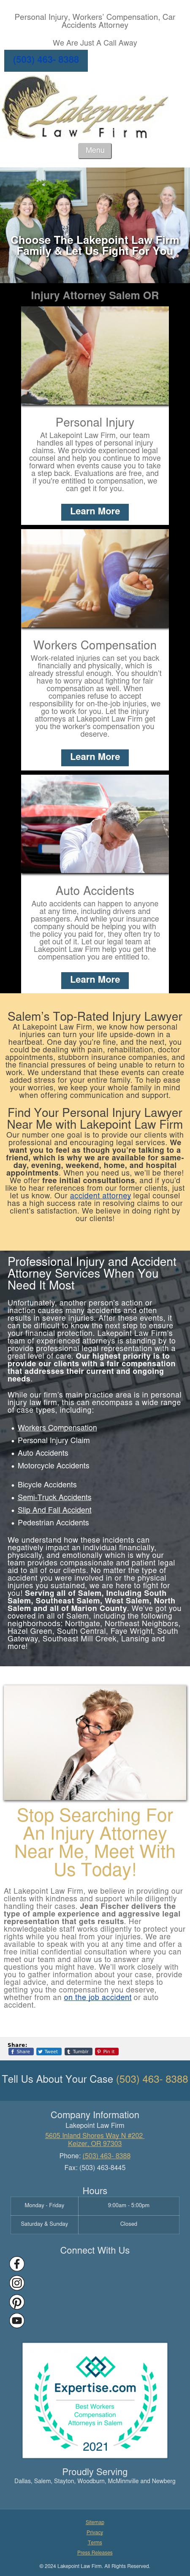 Lakepoint Law Firm - Keizer OR Lawyers